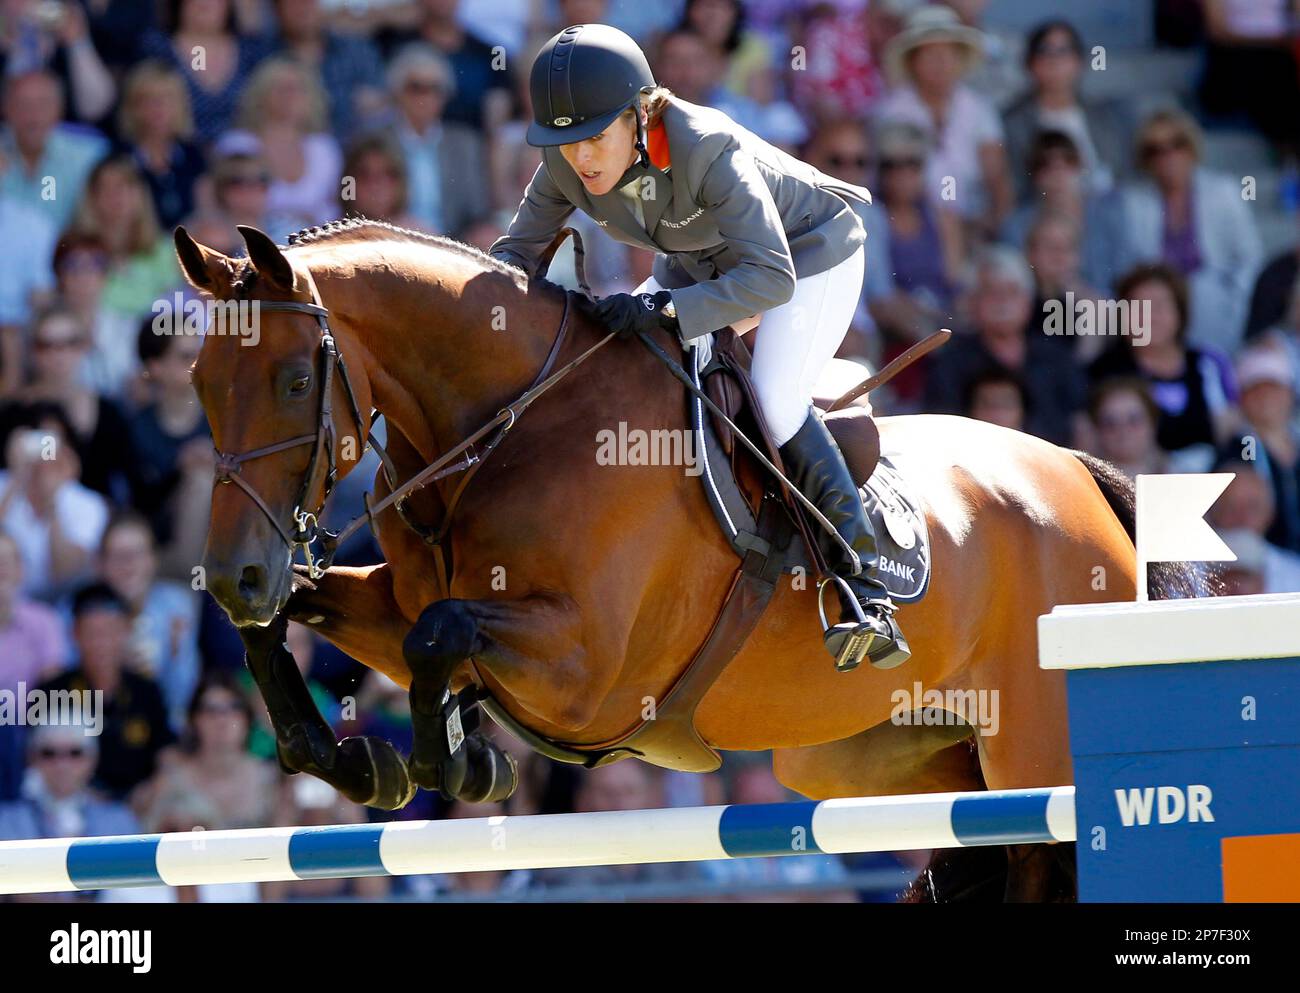 Meredith Michaels-Beerbaum from Germany riding her horse Shutterfly jumps over an obstacle in the first of two rounds in the jumping competition Rolex Grand Prix, The Grand Prix of Aachen, at the